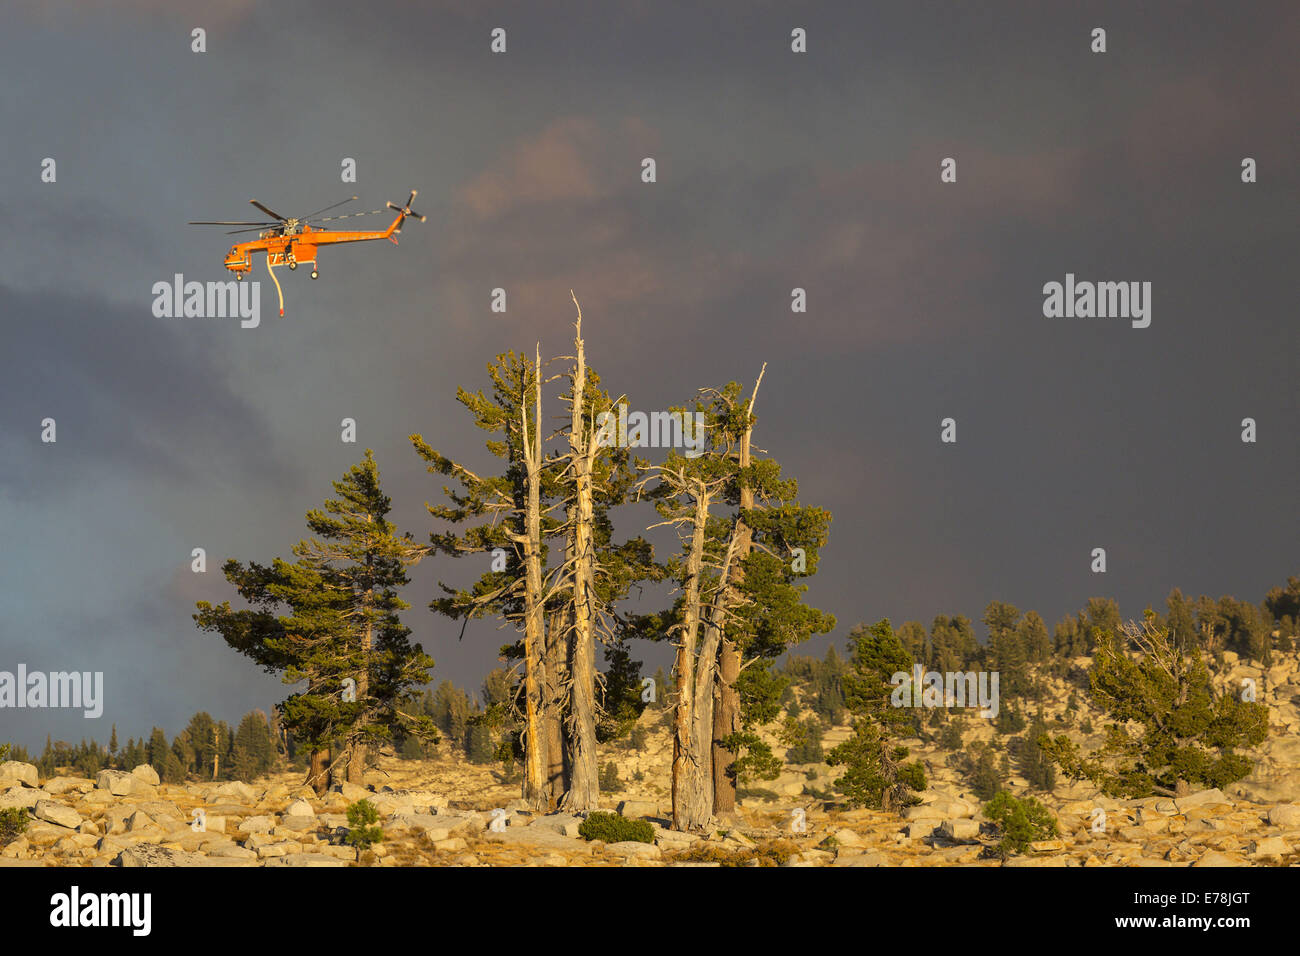 Yosemite National Park, California, USA. 7th Sep, 2014. An Aircrane helicopter, used to battle the Meadow Fire in Yosemite National Park, is seen from the Olmsted Point area along Tioga Pass Road/Highway 120. The wildfire is located east of Little Yosemite Valley and is approximately 700 acres. Approximately 100 people were evacuated by helicopter from the areas around Half Dome and Little Yosemite Valley. © Tracy Barbutes/ZUMA Wire/Alamy Live News Stock Photo